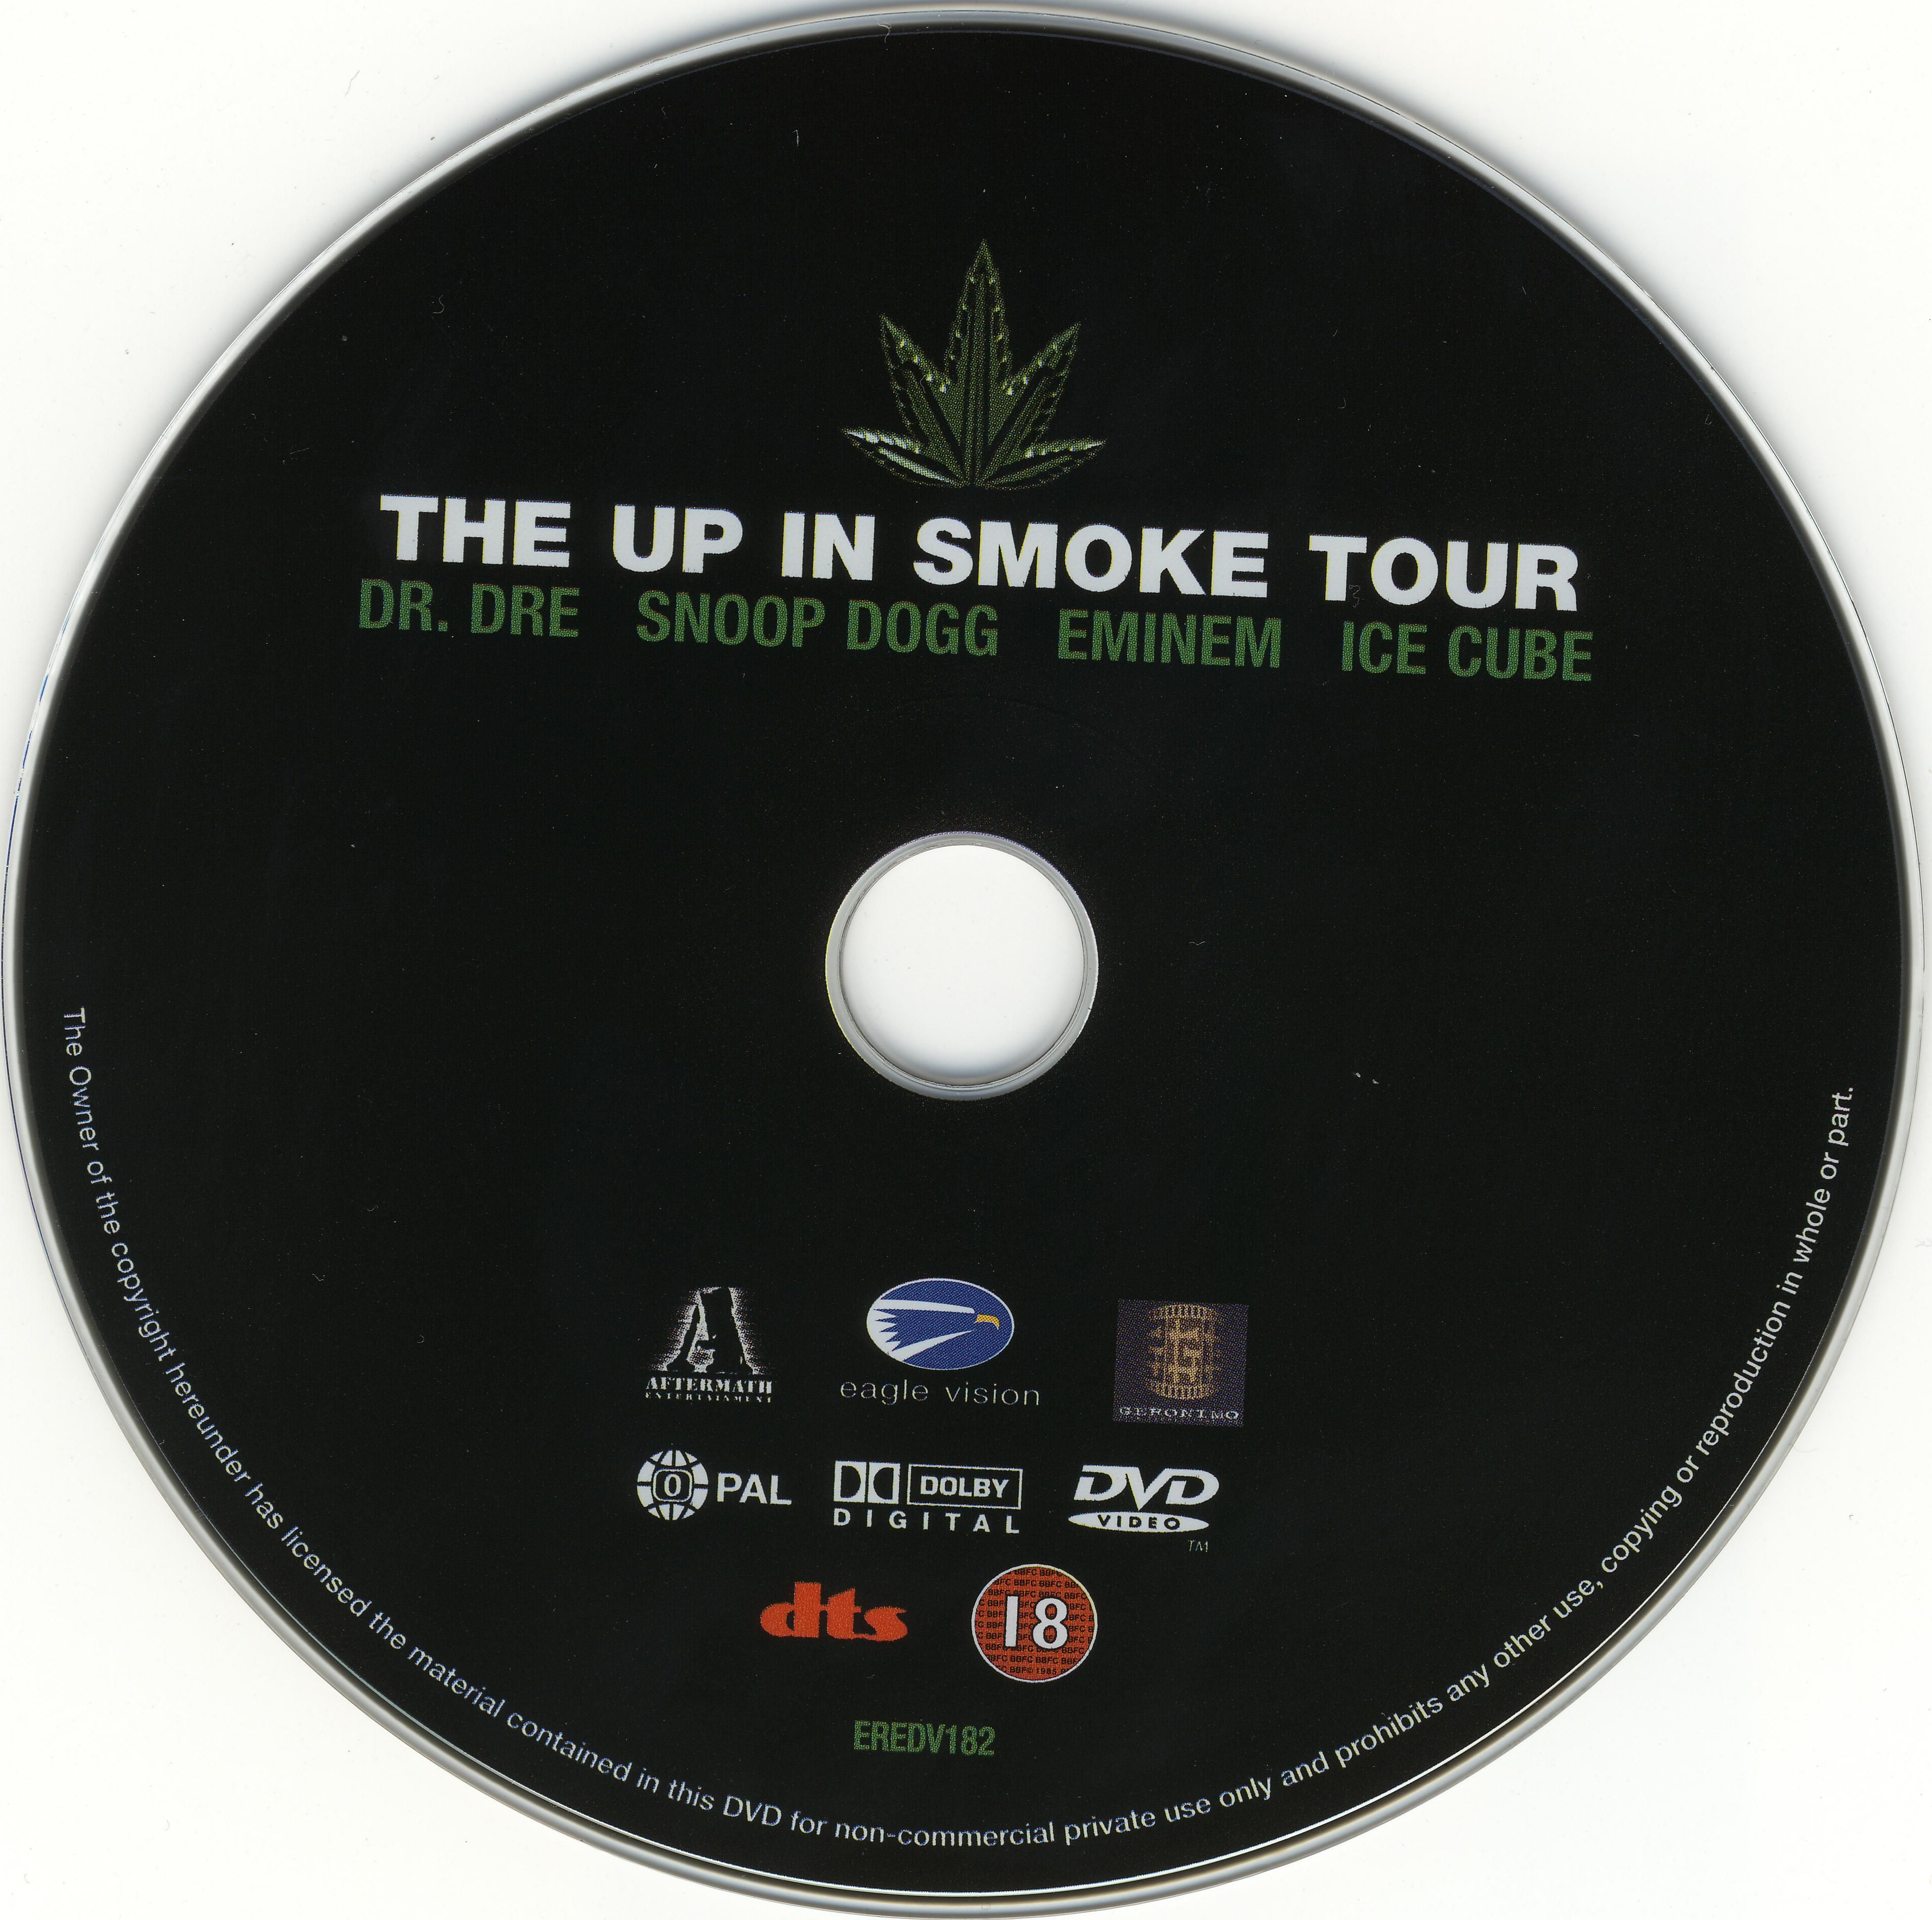 The up in smoke tour